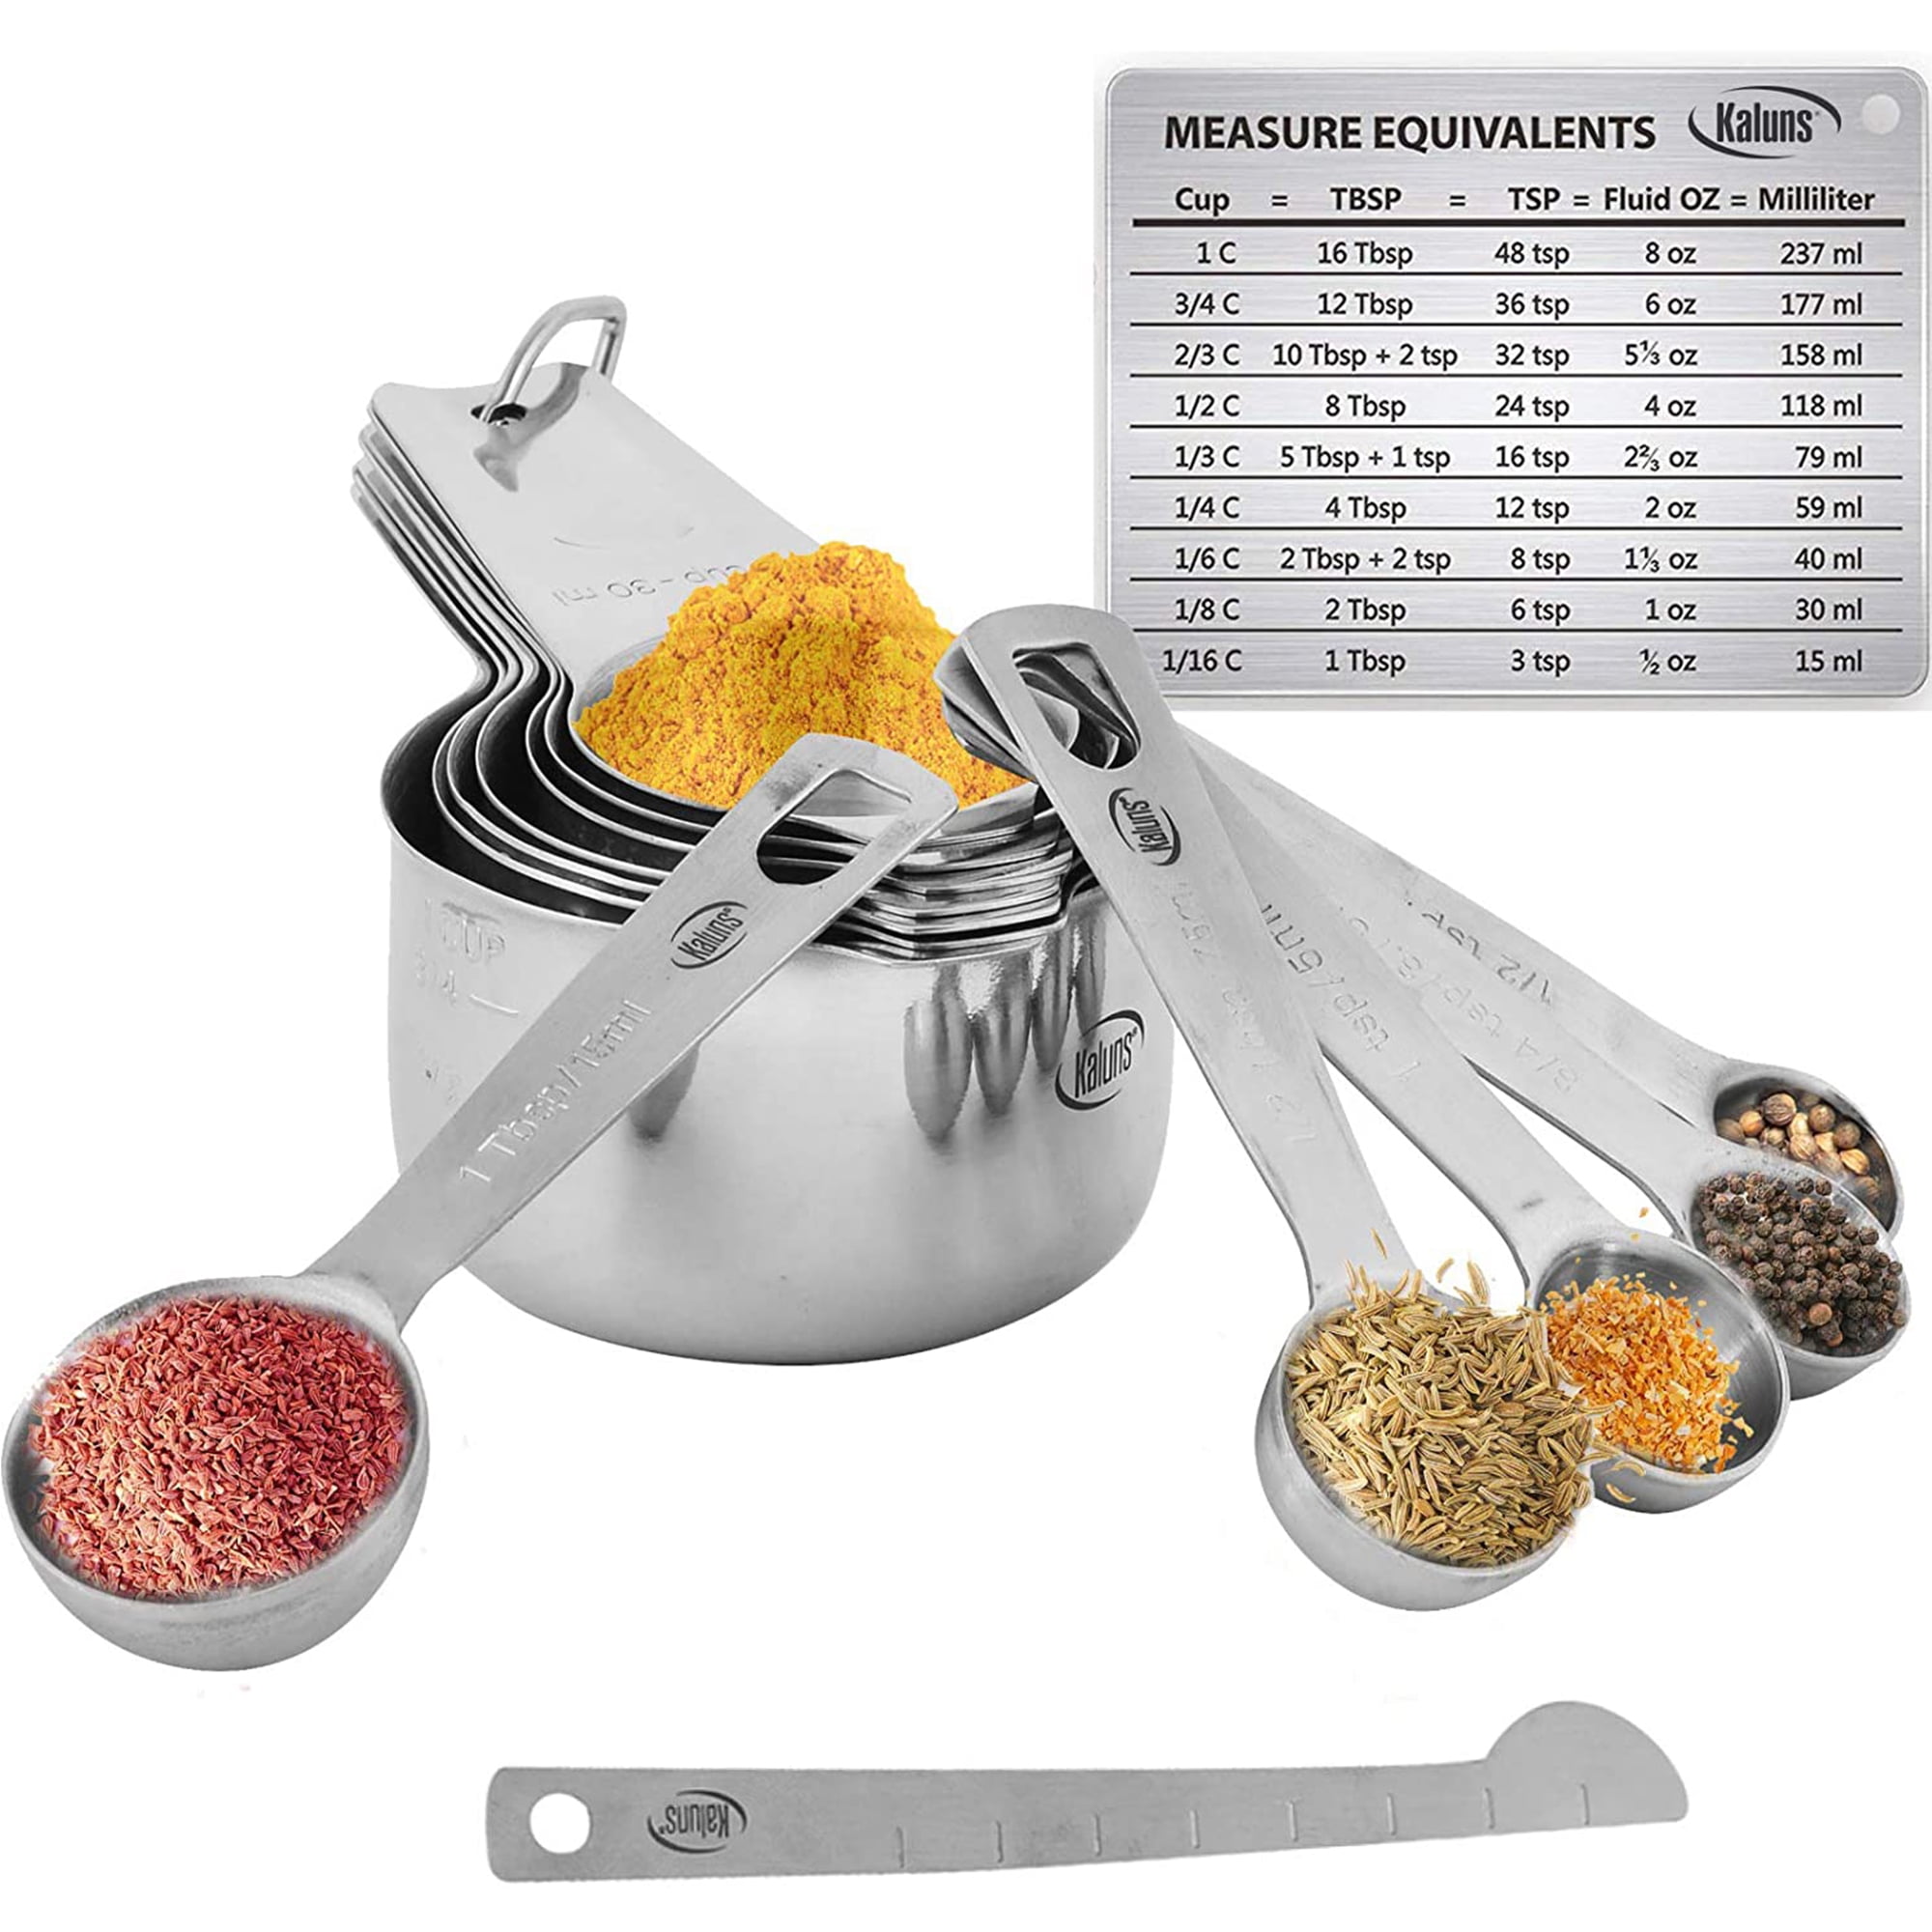 Kalsreui Measuring Cups and Spoons set, Collapsible Measuring Cups, 8  pieces Measuring Cups&Spoons Set, Engraved Metric & US Markings for  Liquid&Dry